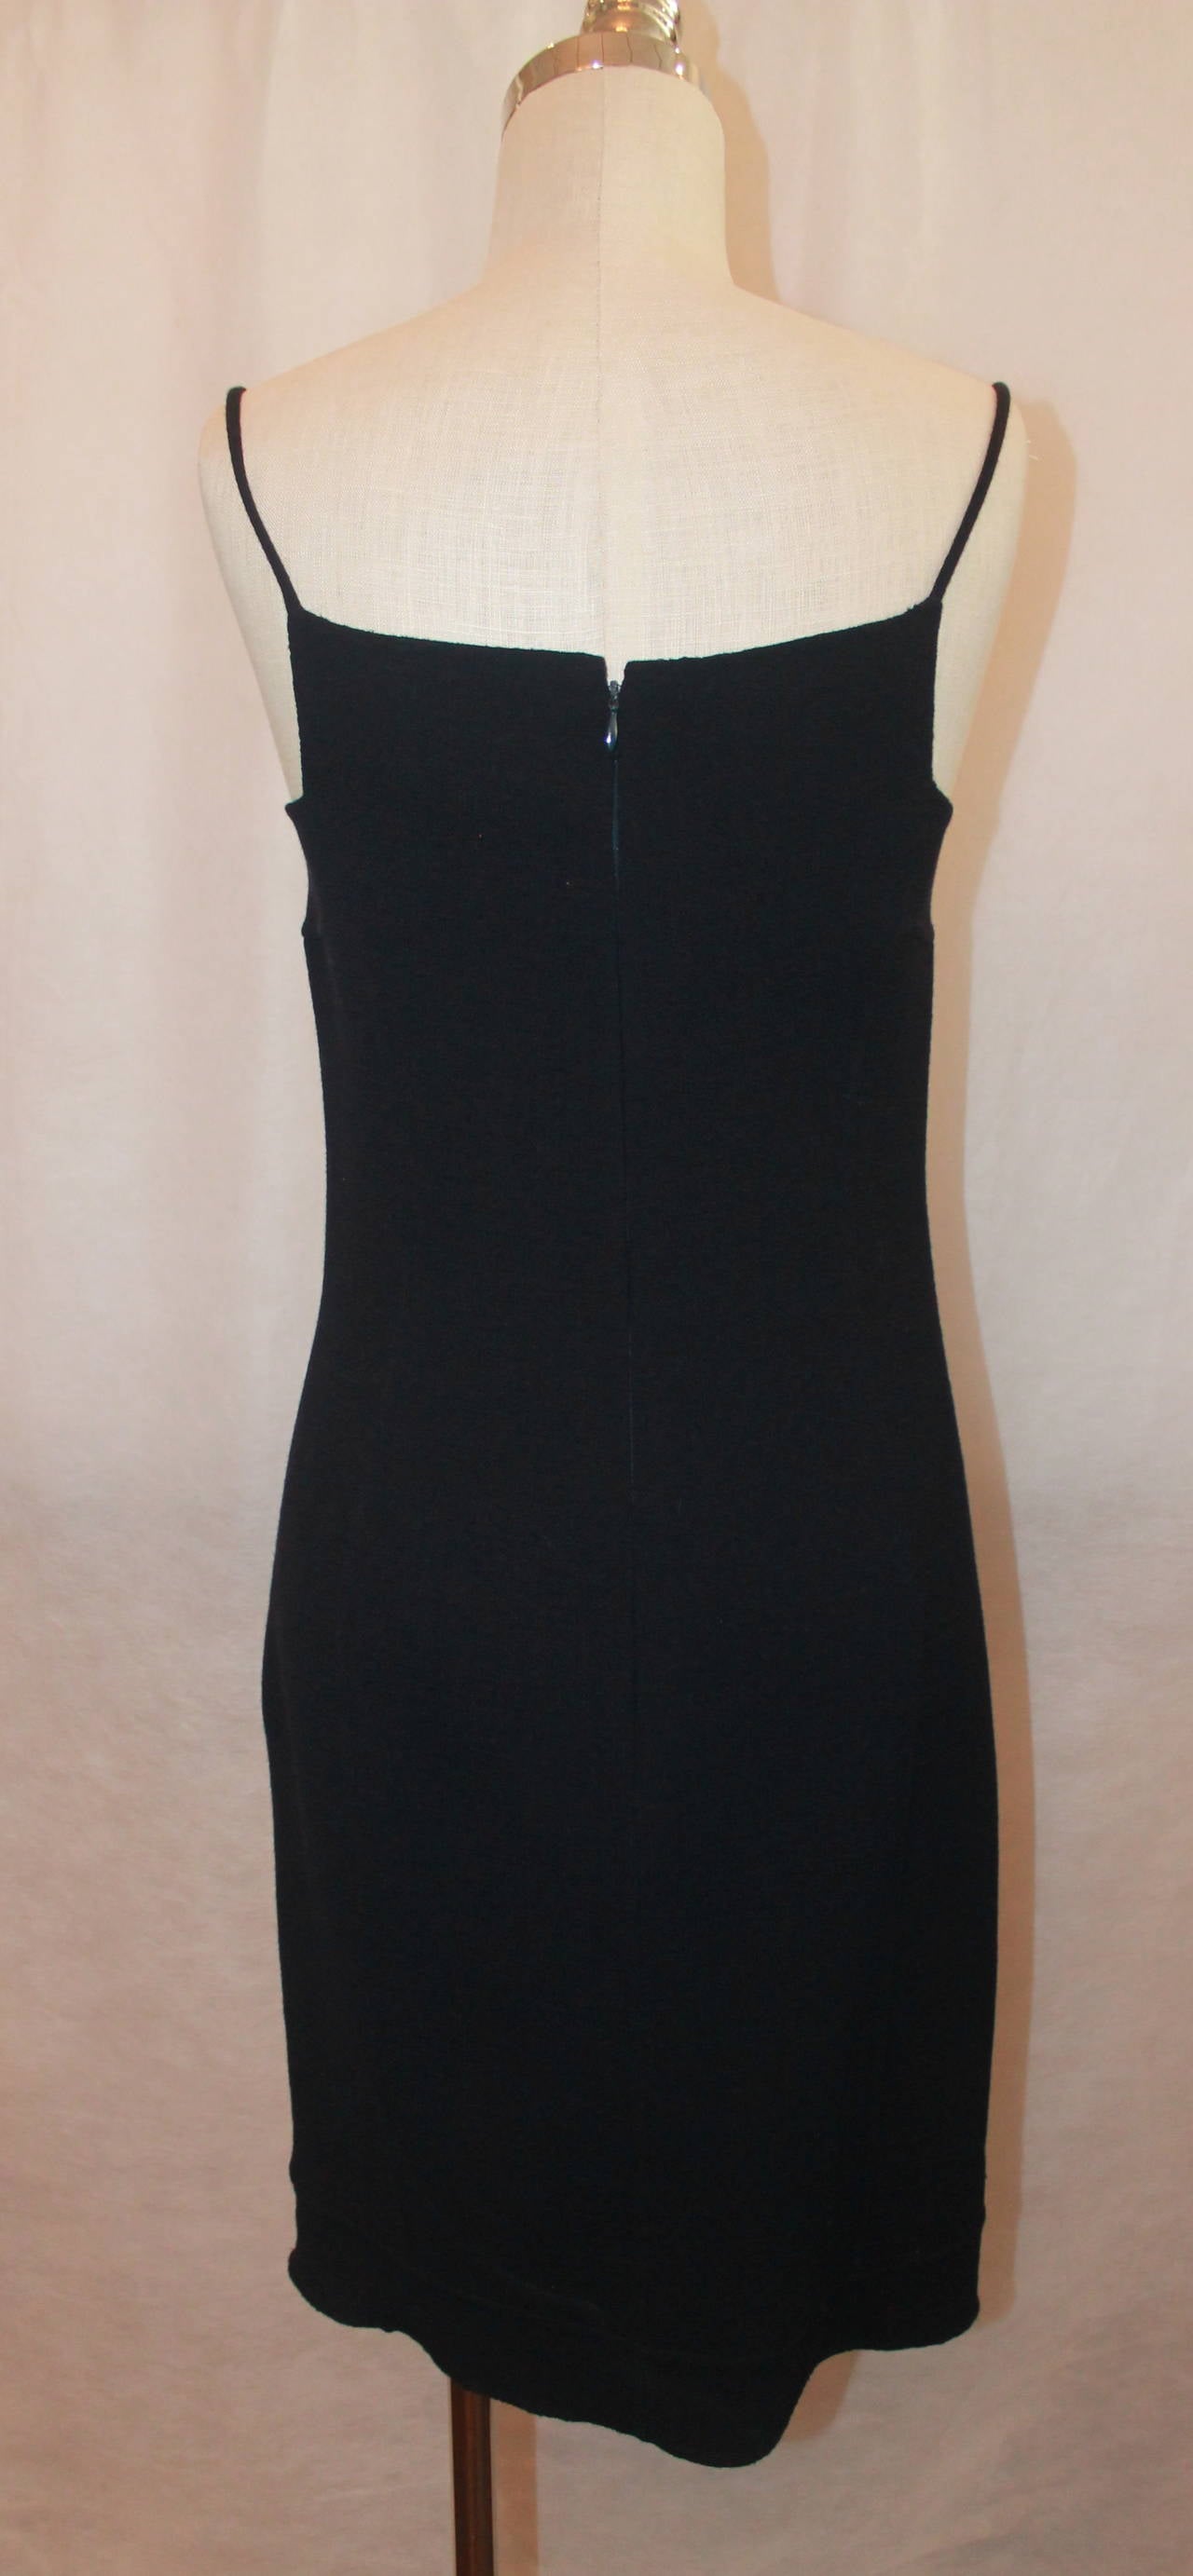 Chado Navy Wool Dress - 10 In Excellent Condition For Sale In West Palm Beach, FL